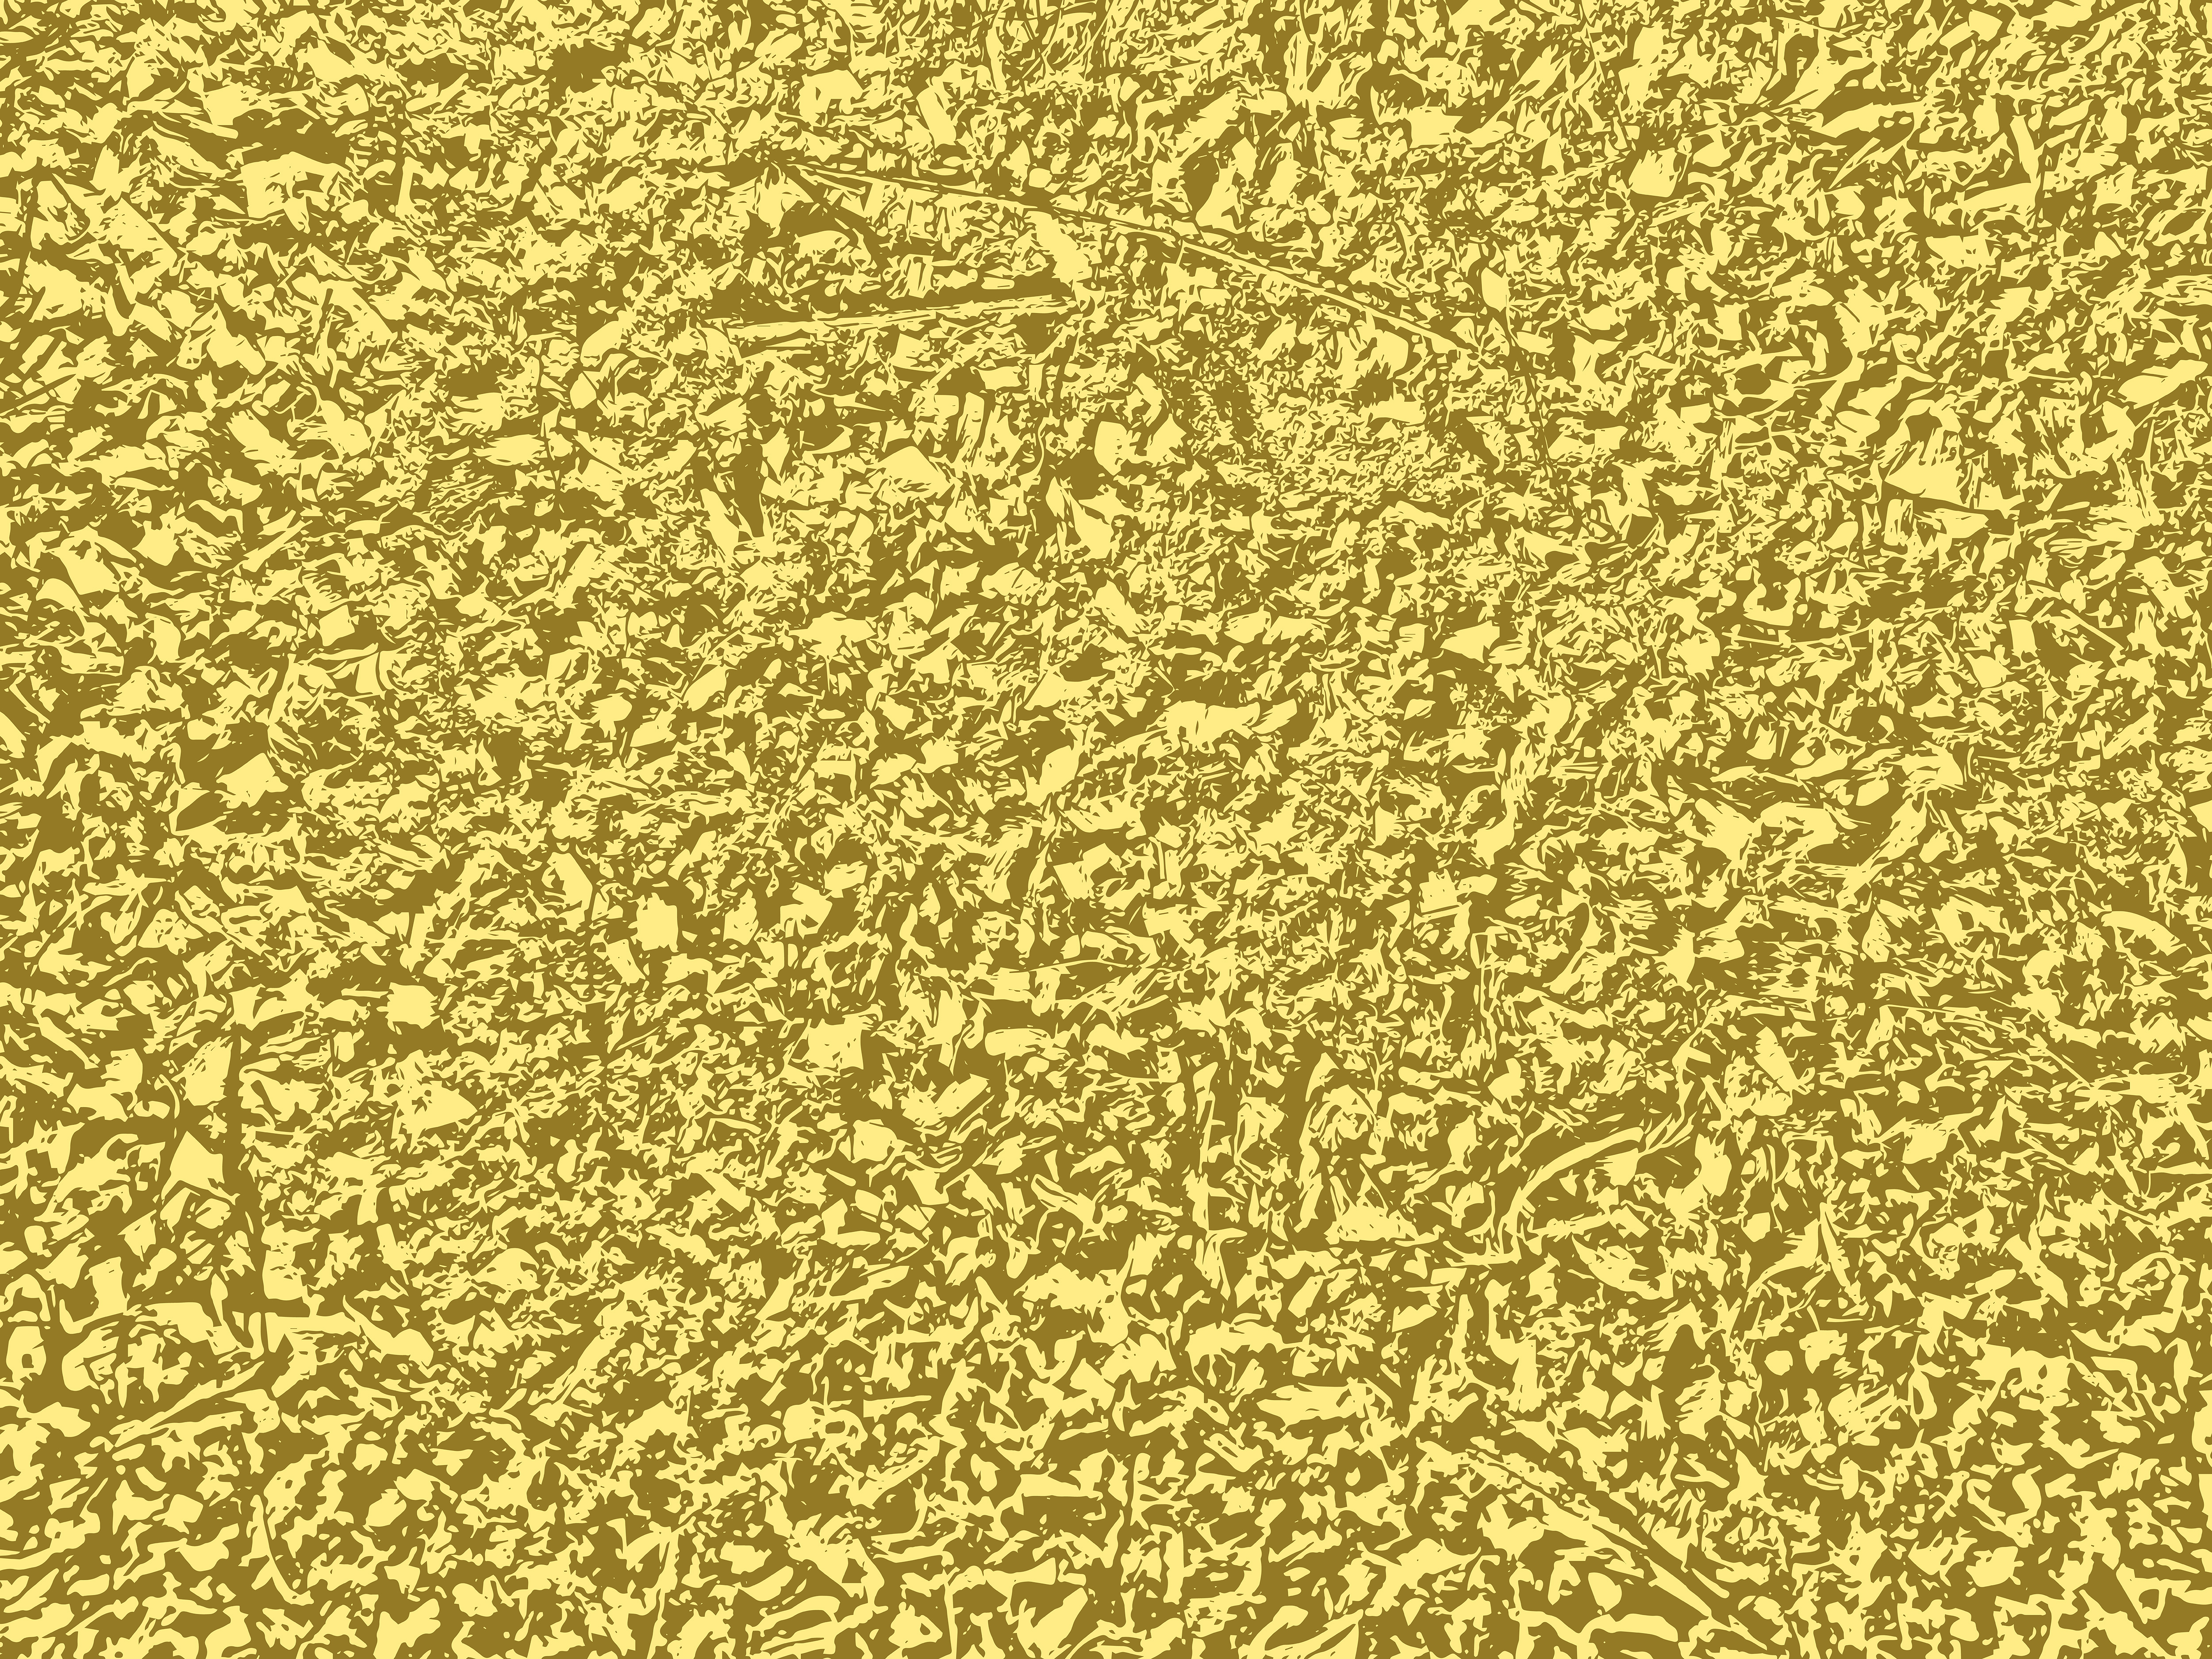 Gold Foil Looking Background Gallery Yopriceville High